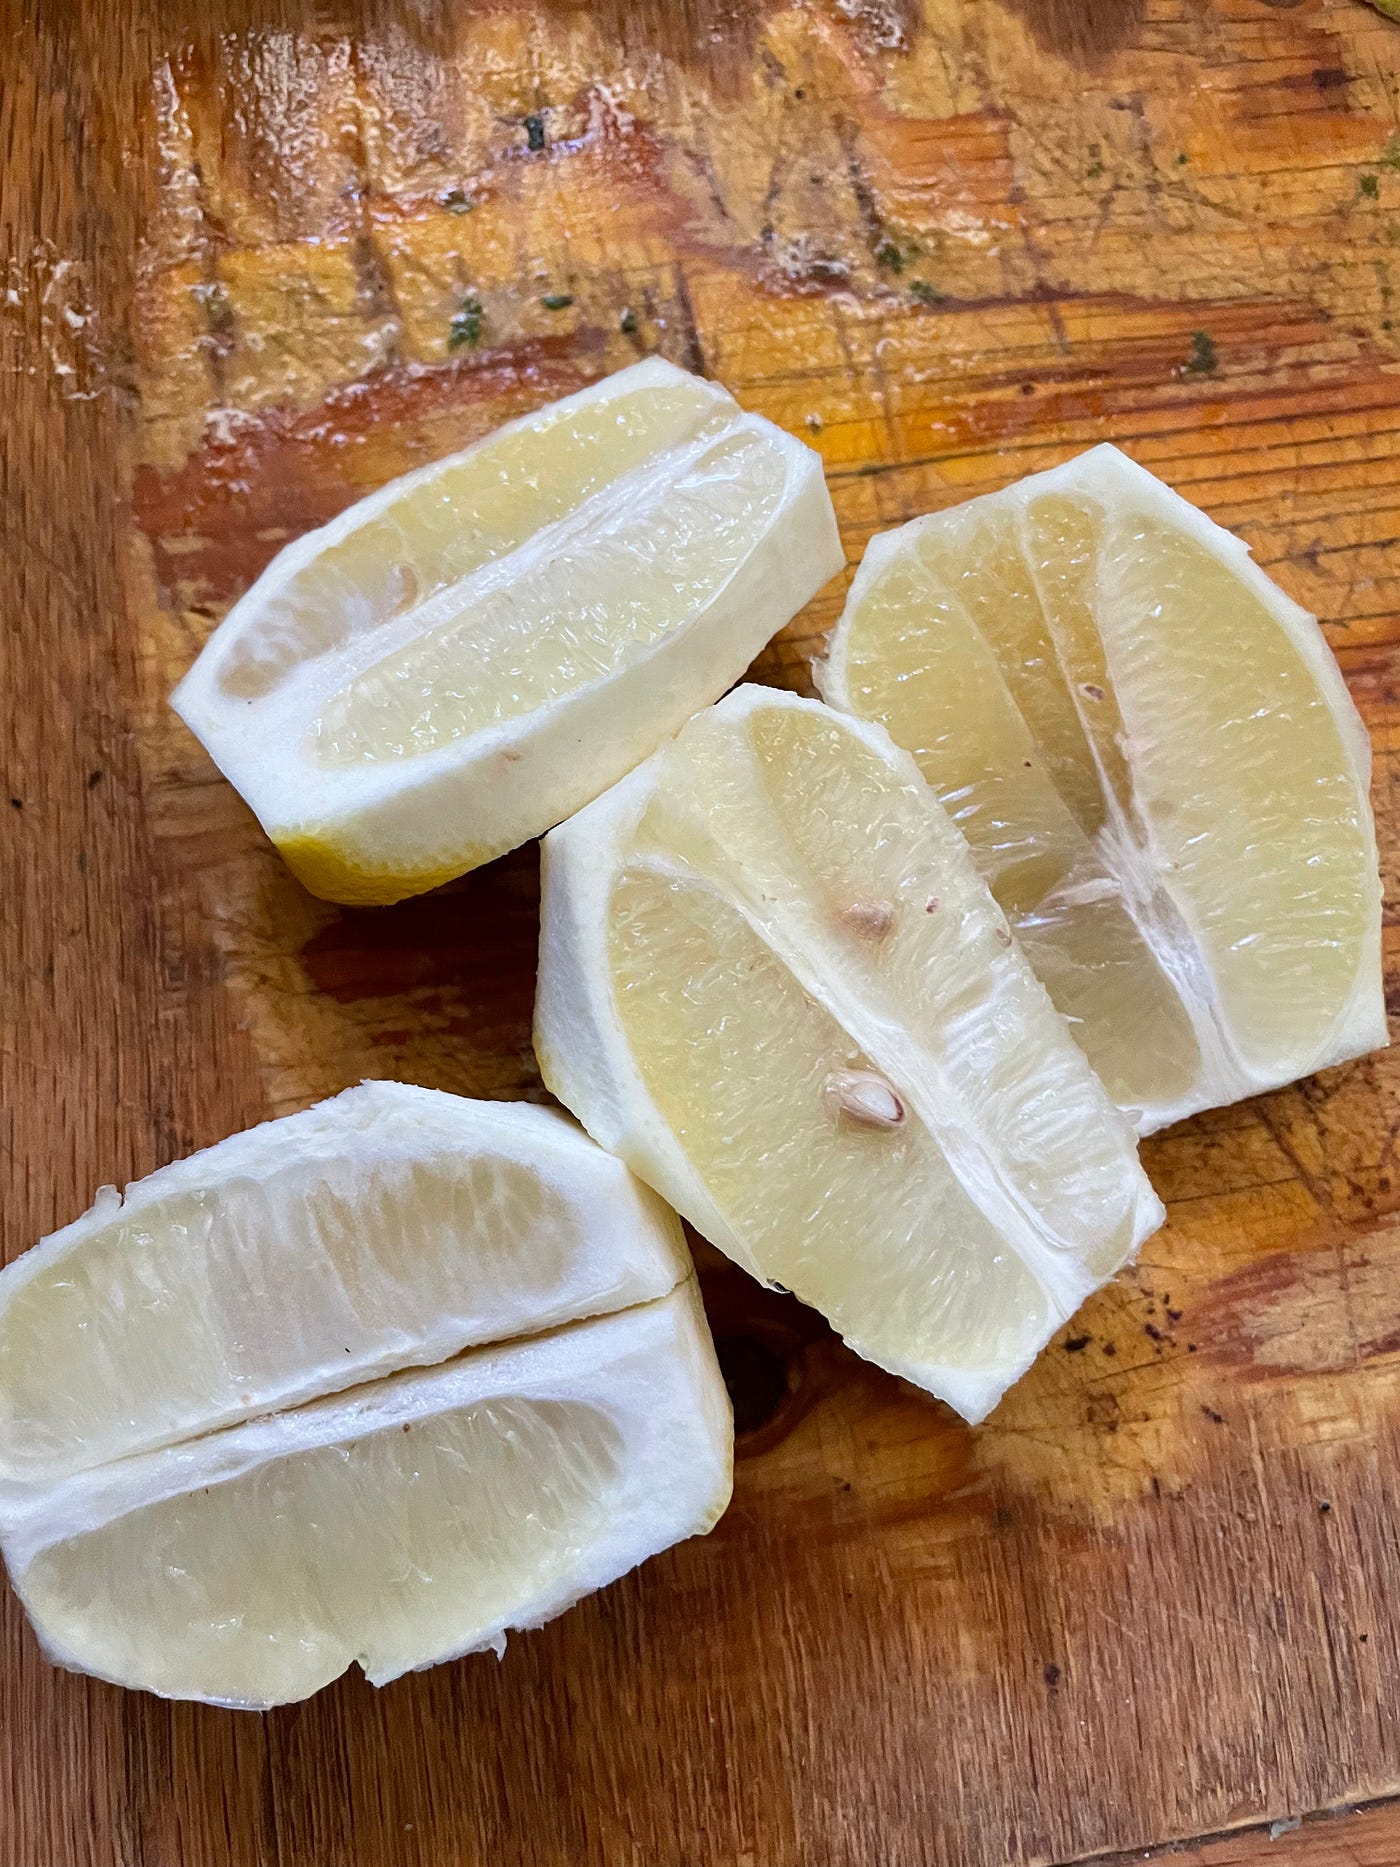 Two lemons cut in half on a cutting bored.